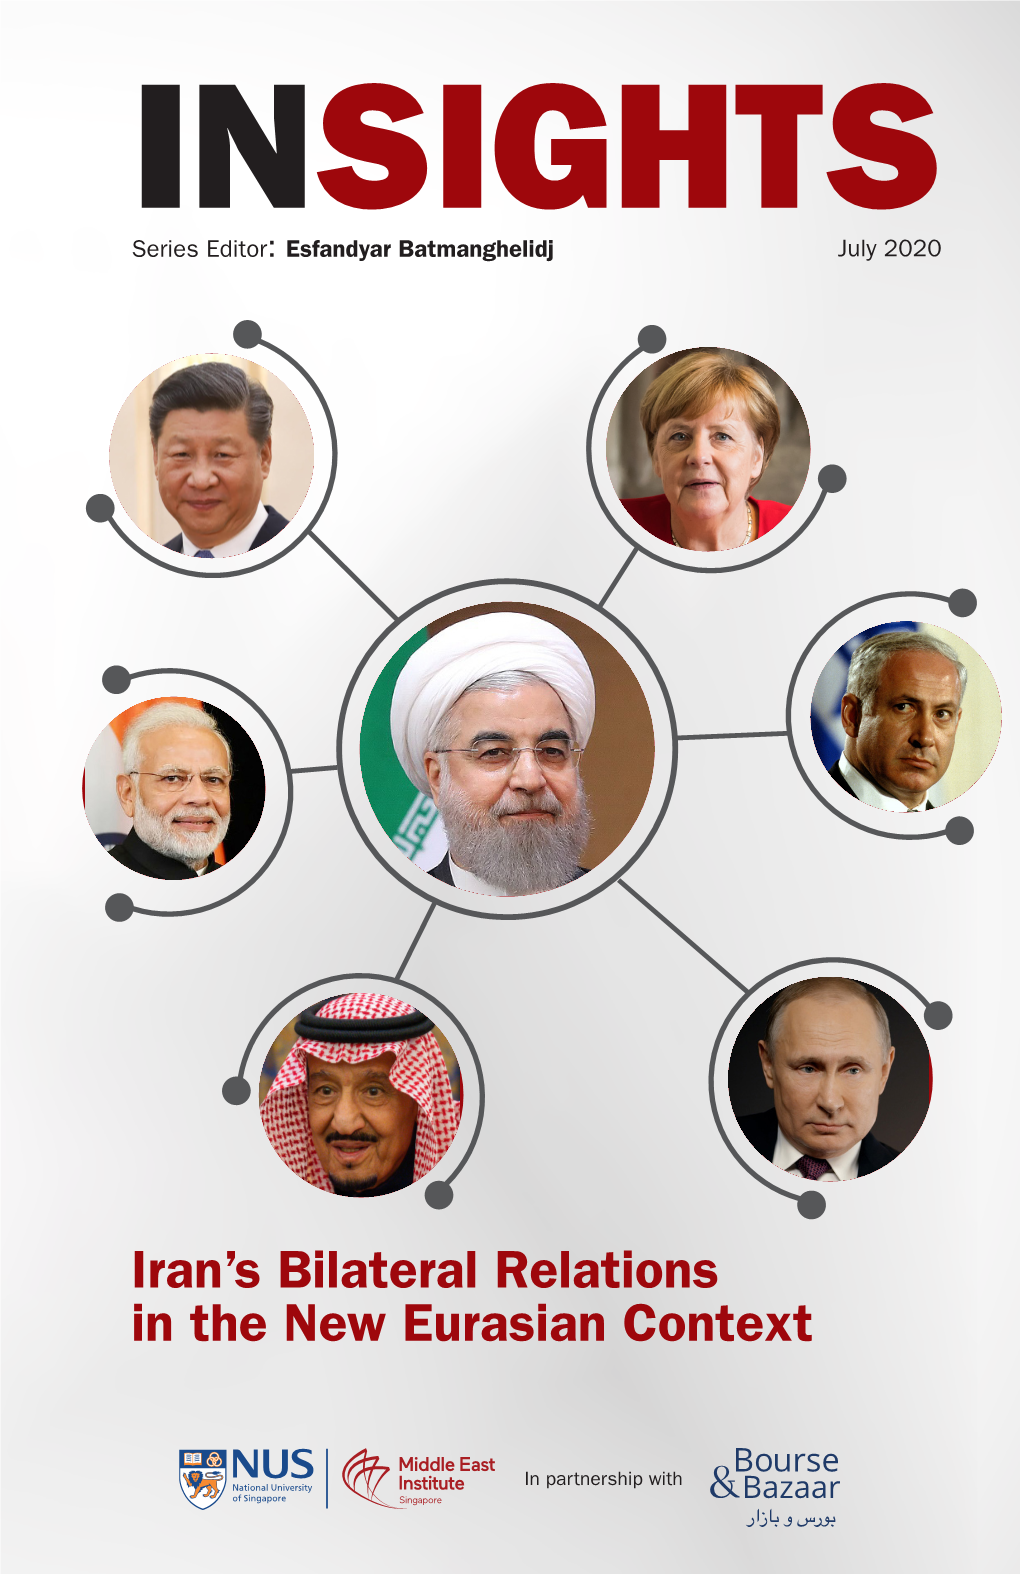 Iran's Bilateral Relations in the New Eurasian Context